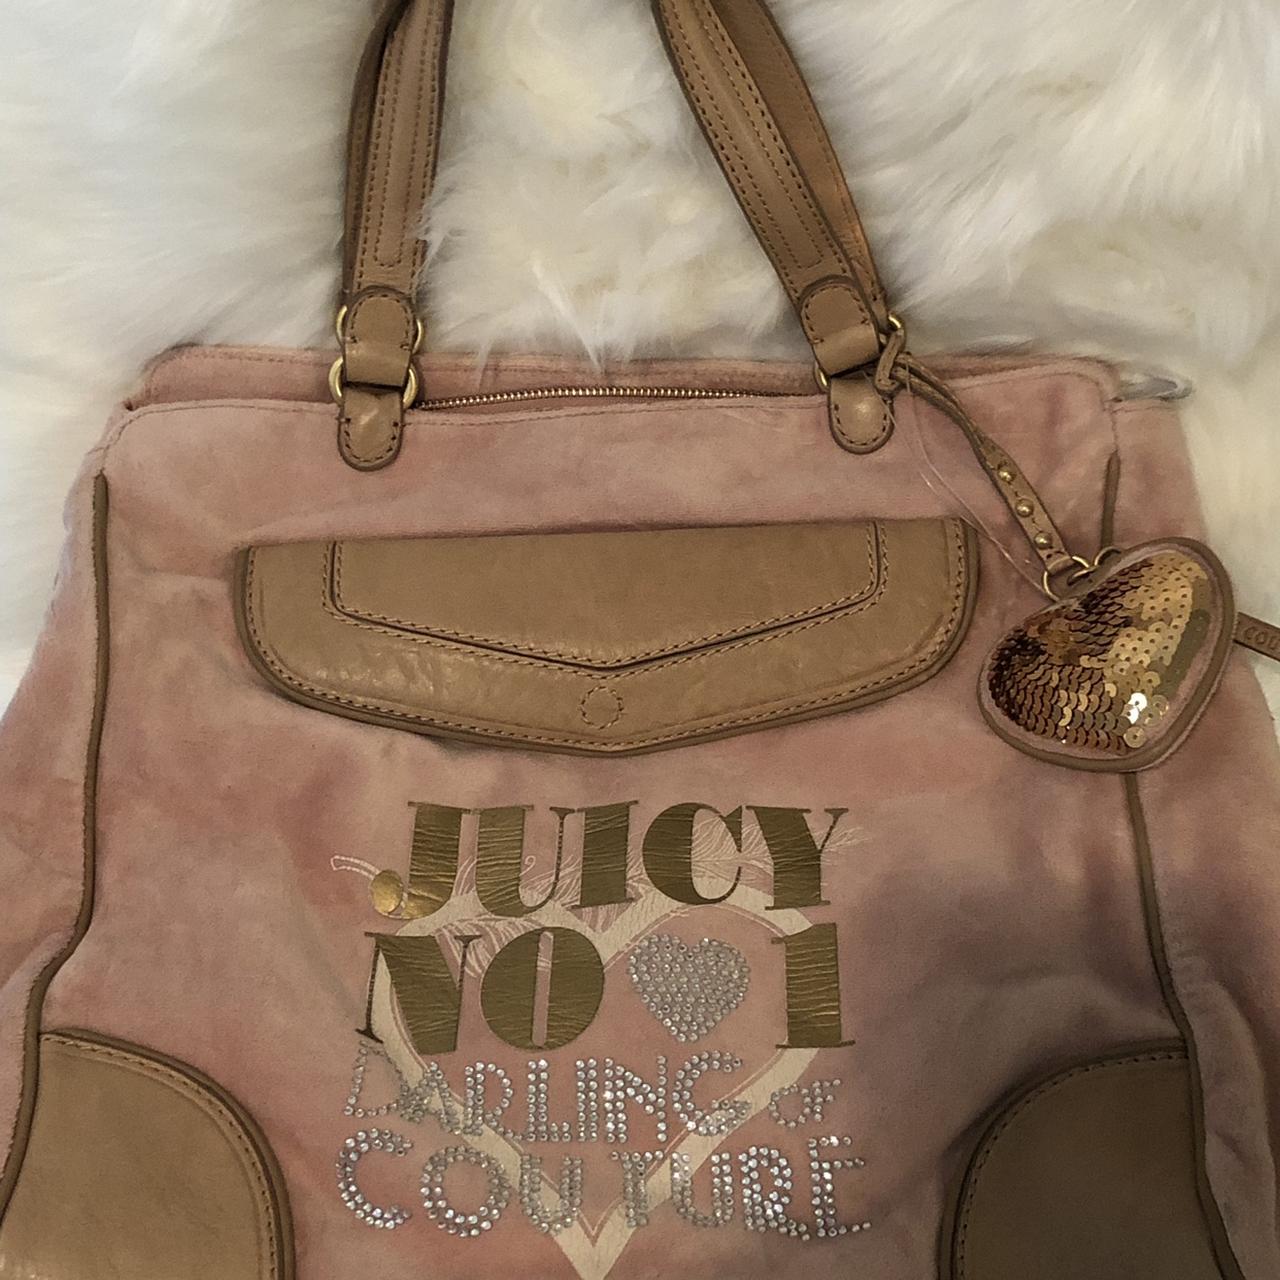 Juicy Couture vintage 90s Y2K purse, Juicy Couture velour and leather purse  bag | eBay